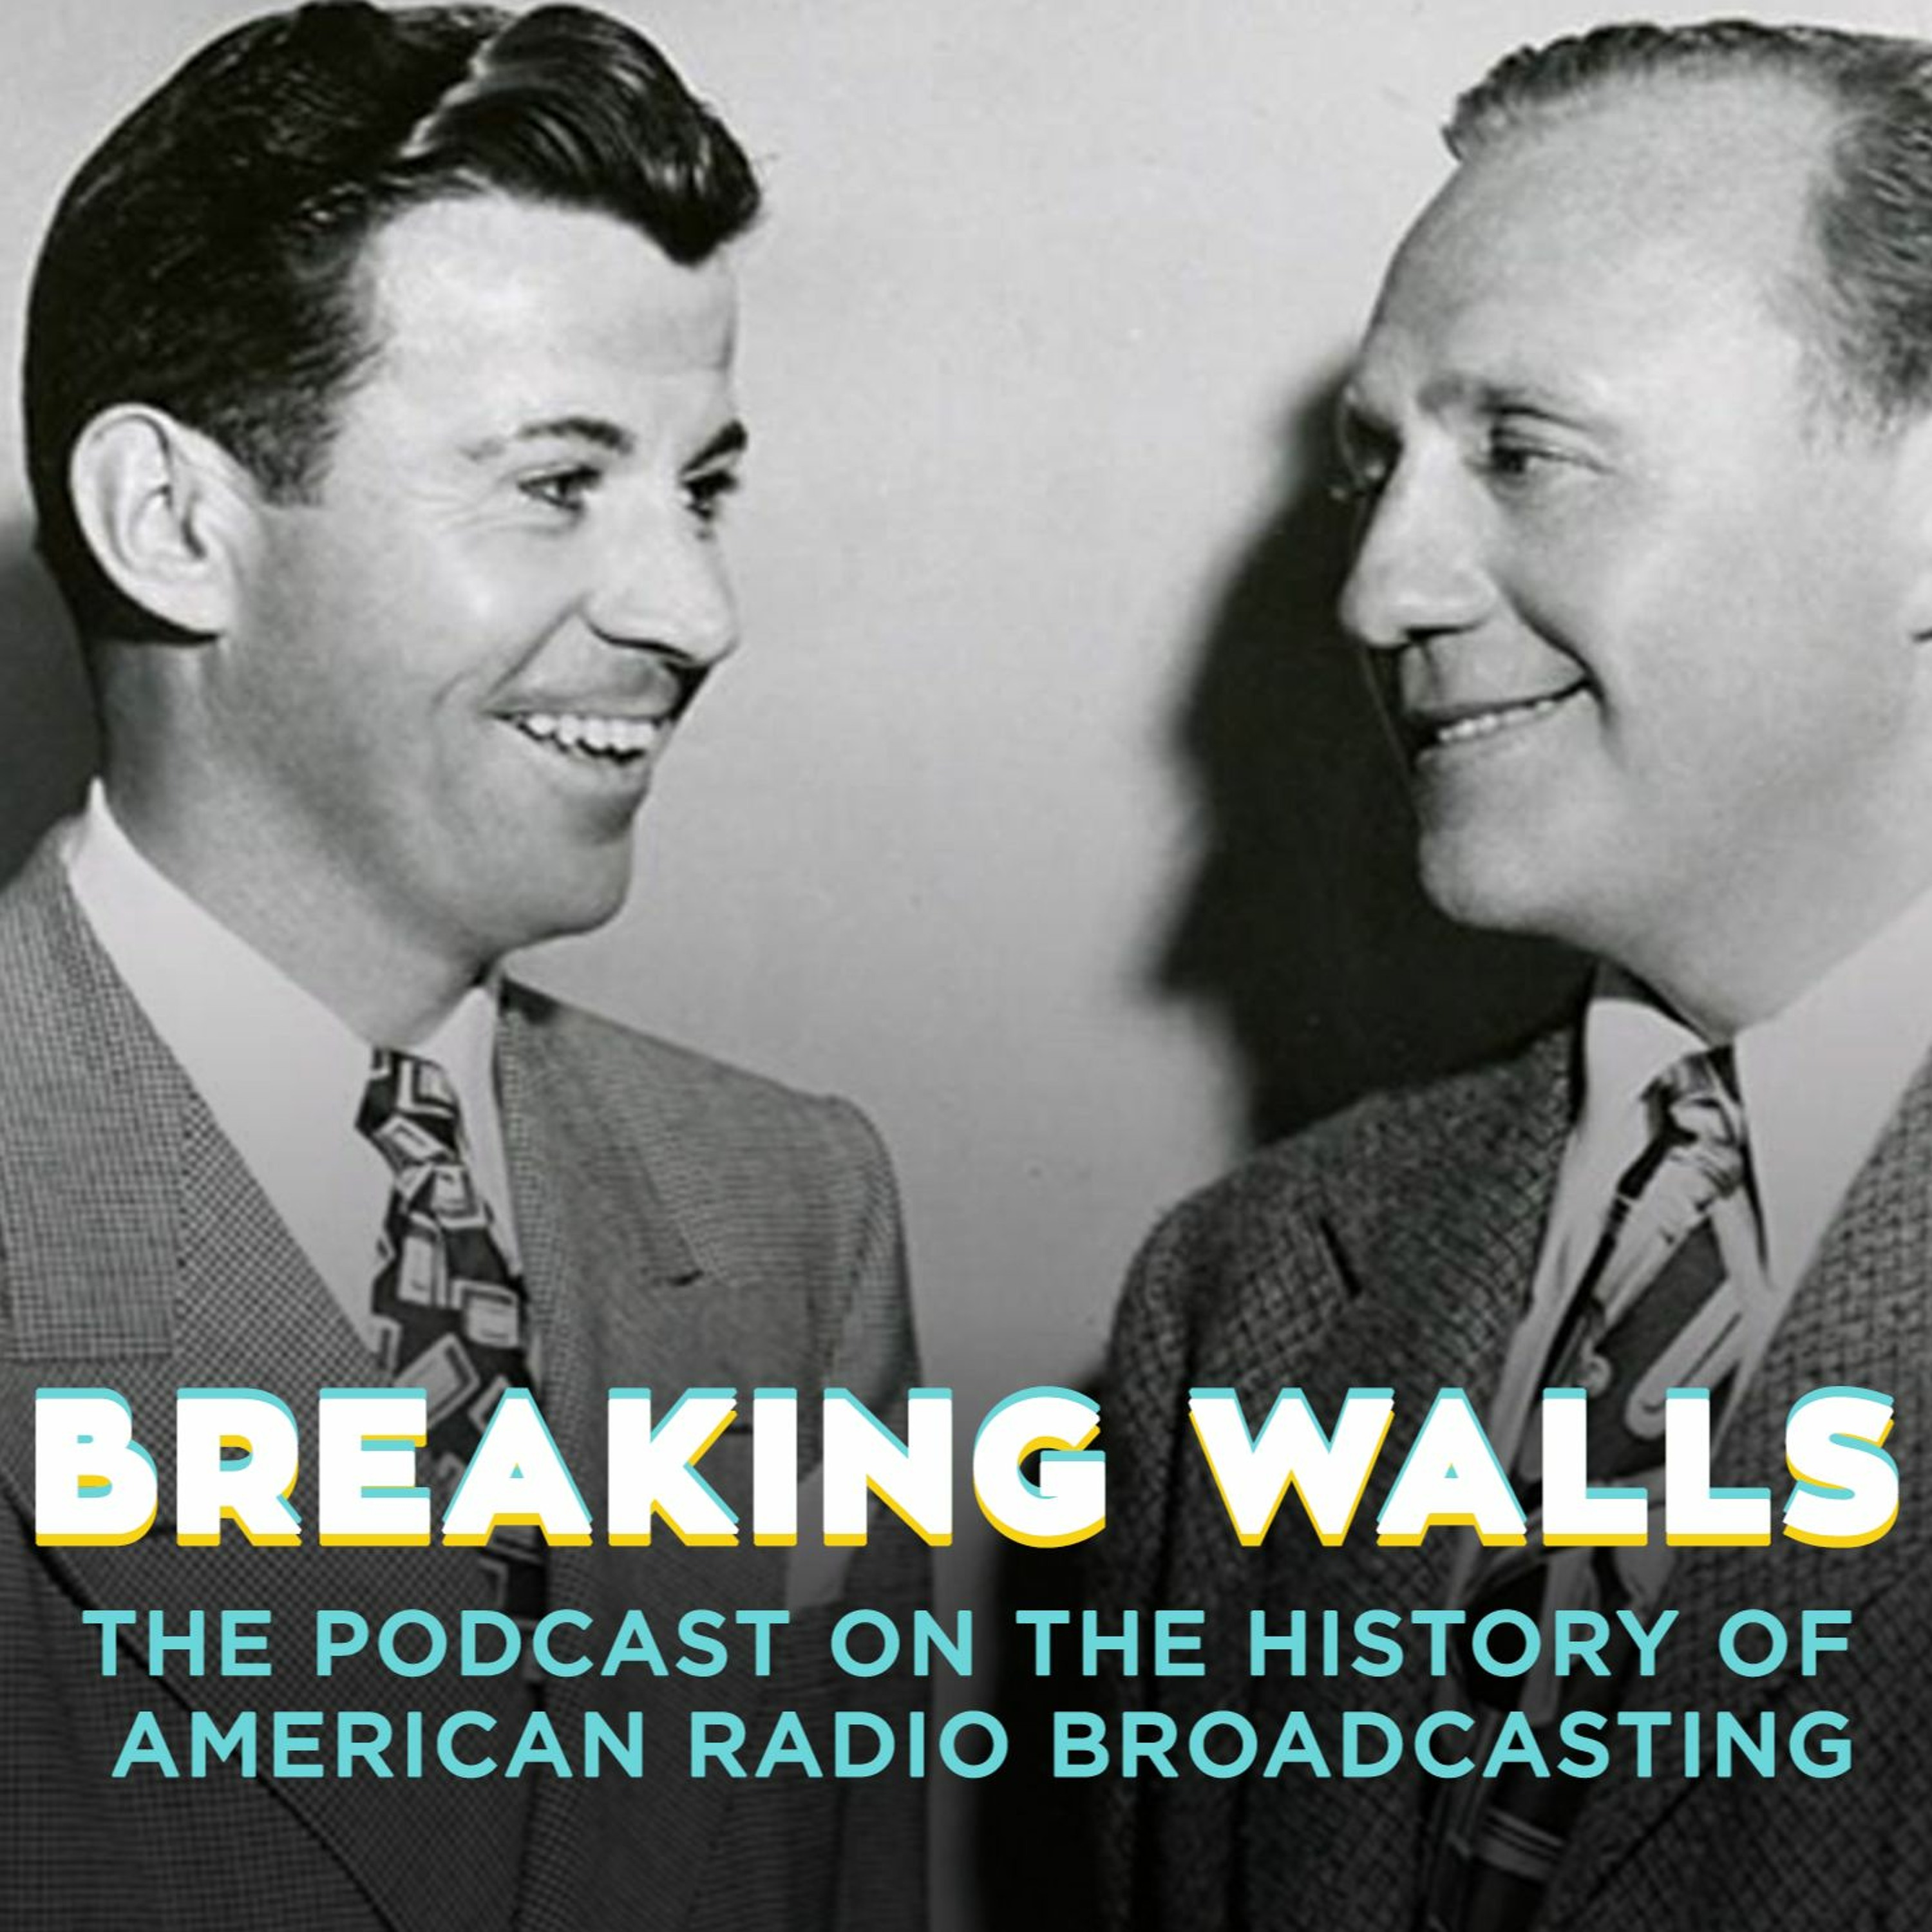 BW - EP151—003: Jack Benny’s Famous Slump—Dennis Day’s Last Show, Leaves For The Navy & World War II